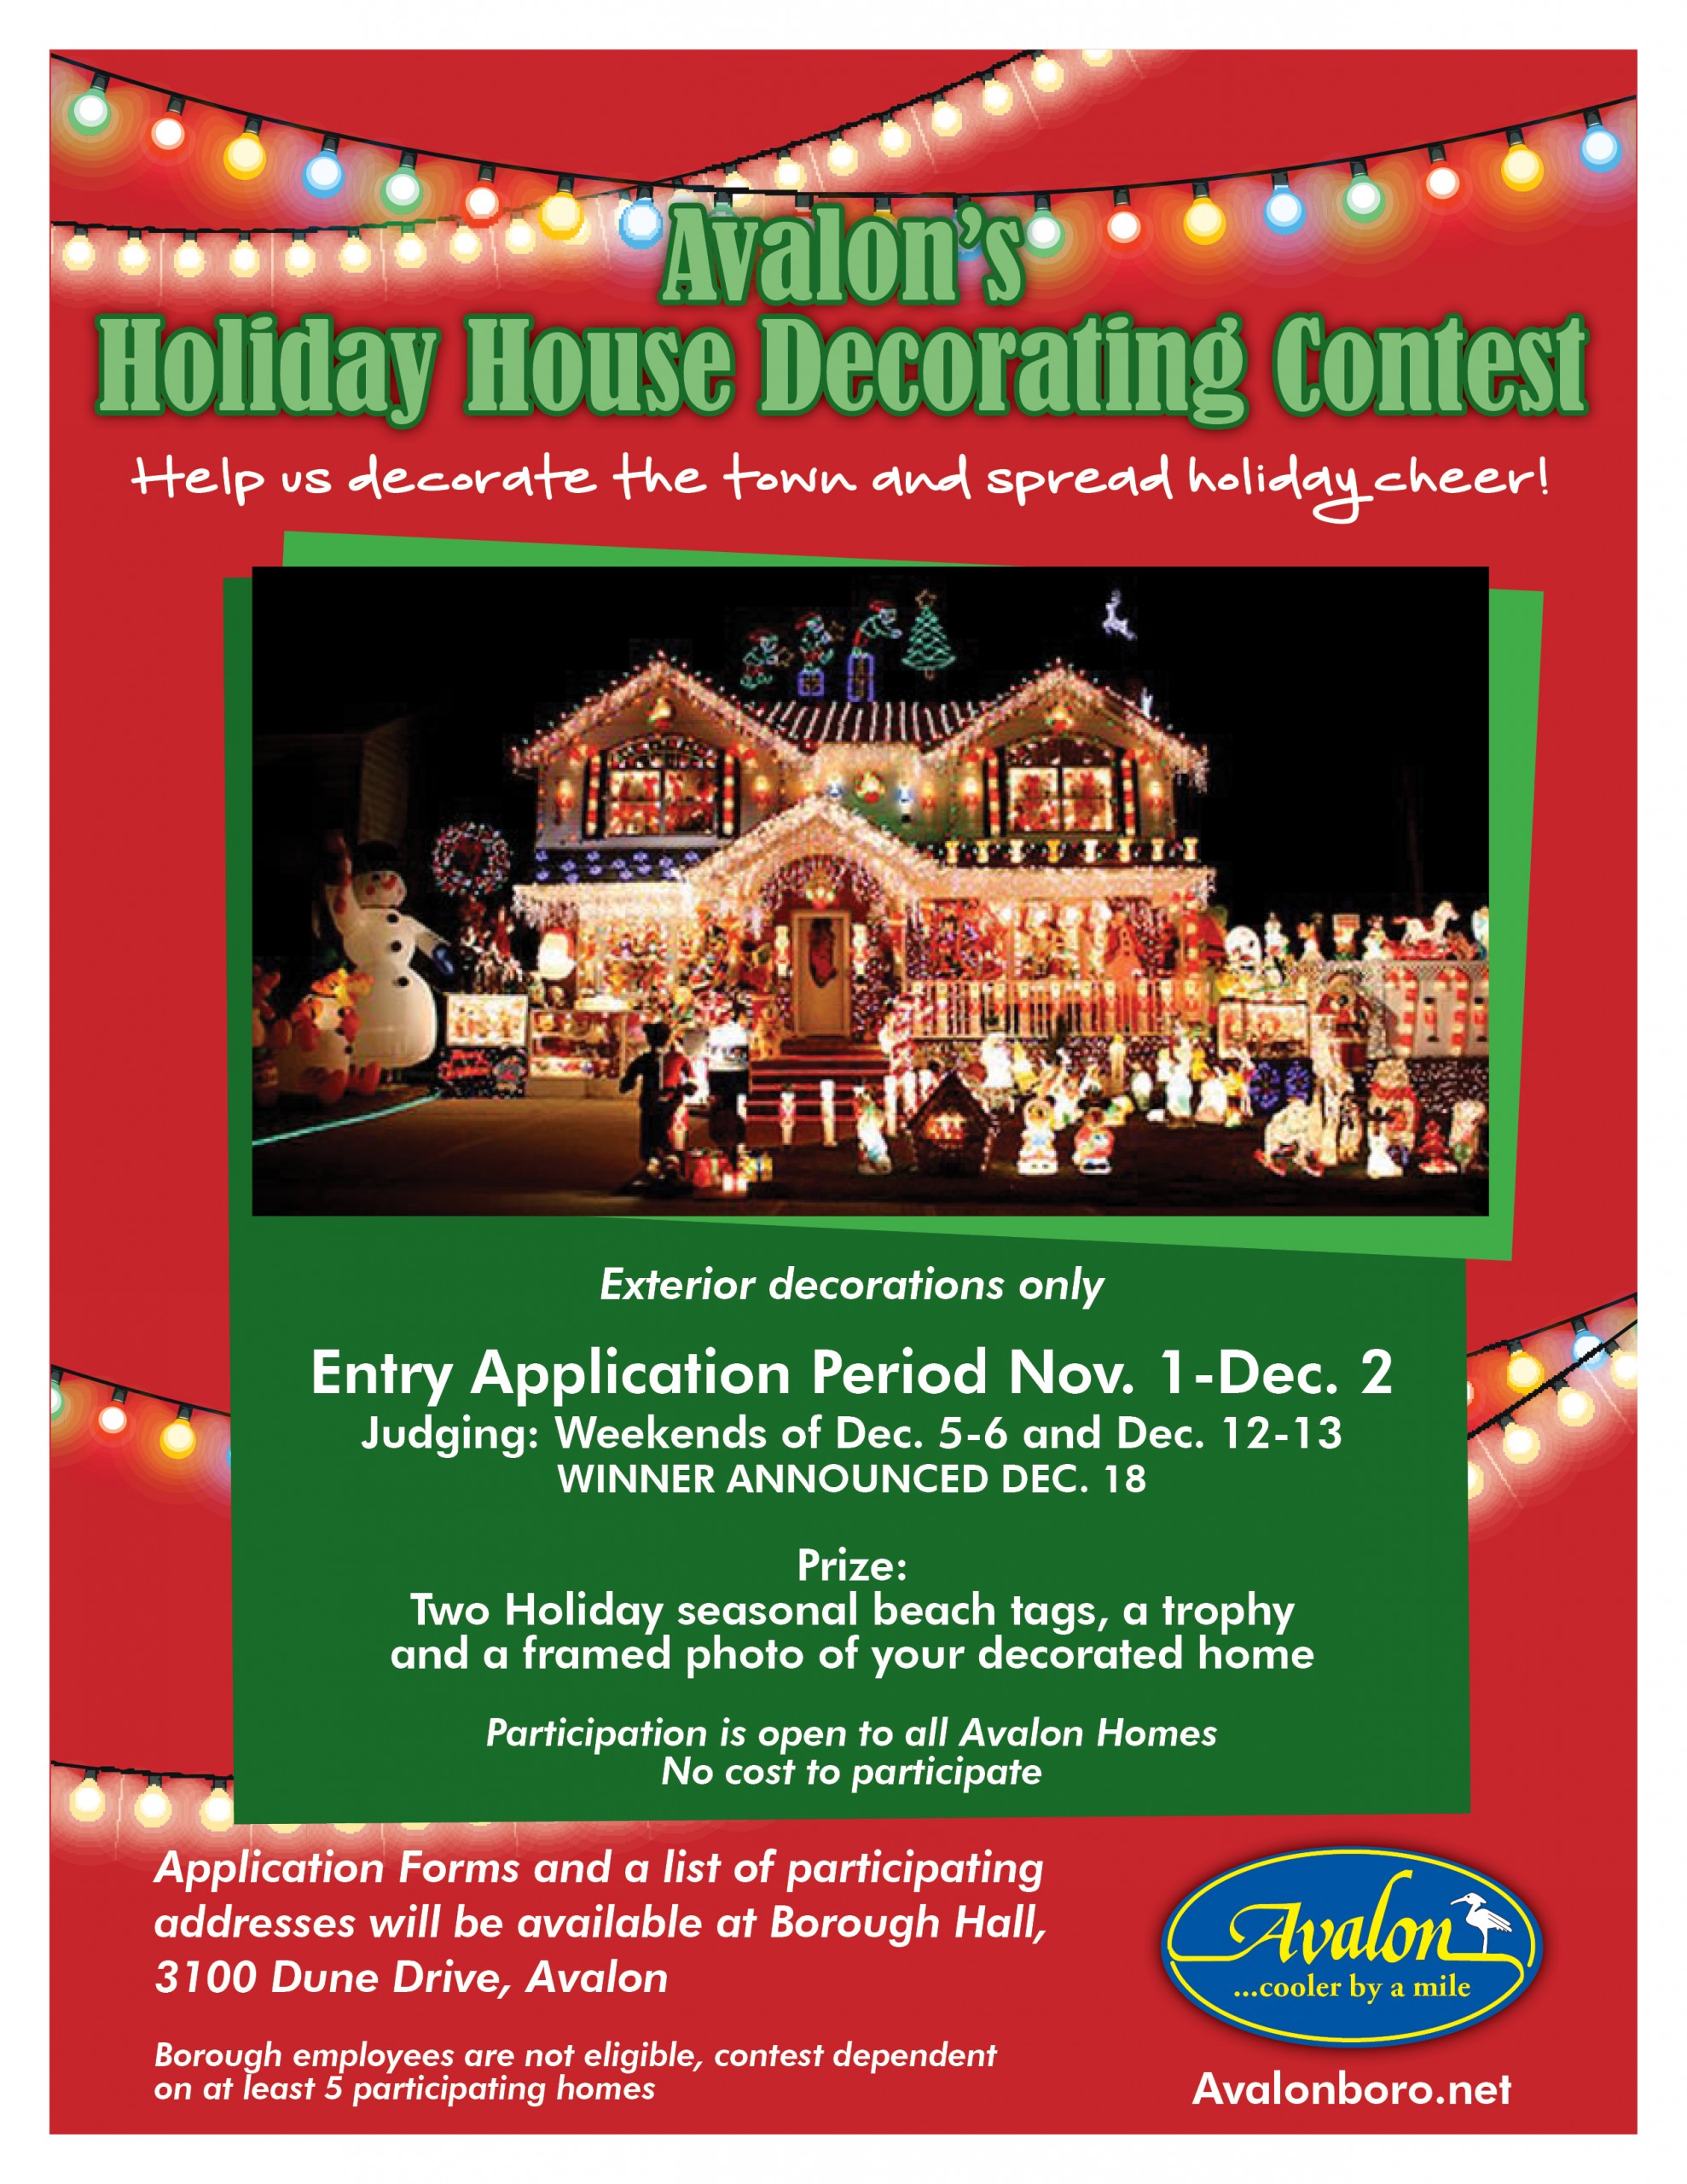 Be a Part of Avalon’s Holiday House Decorating Contest! Avalon, New